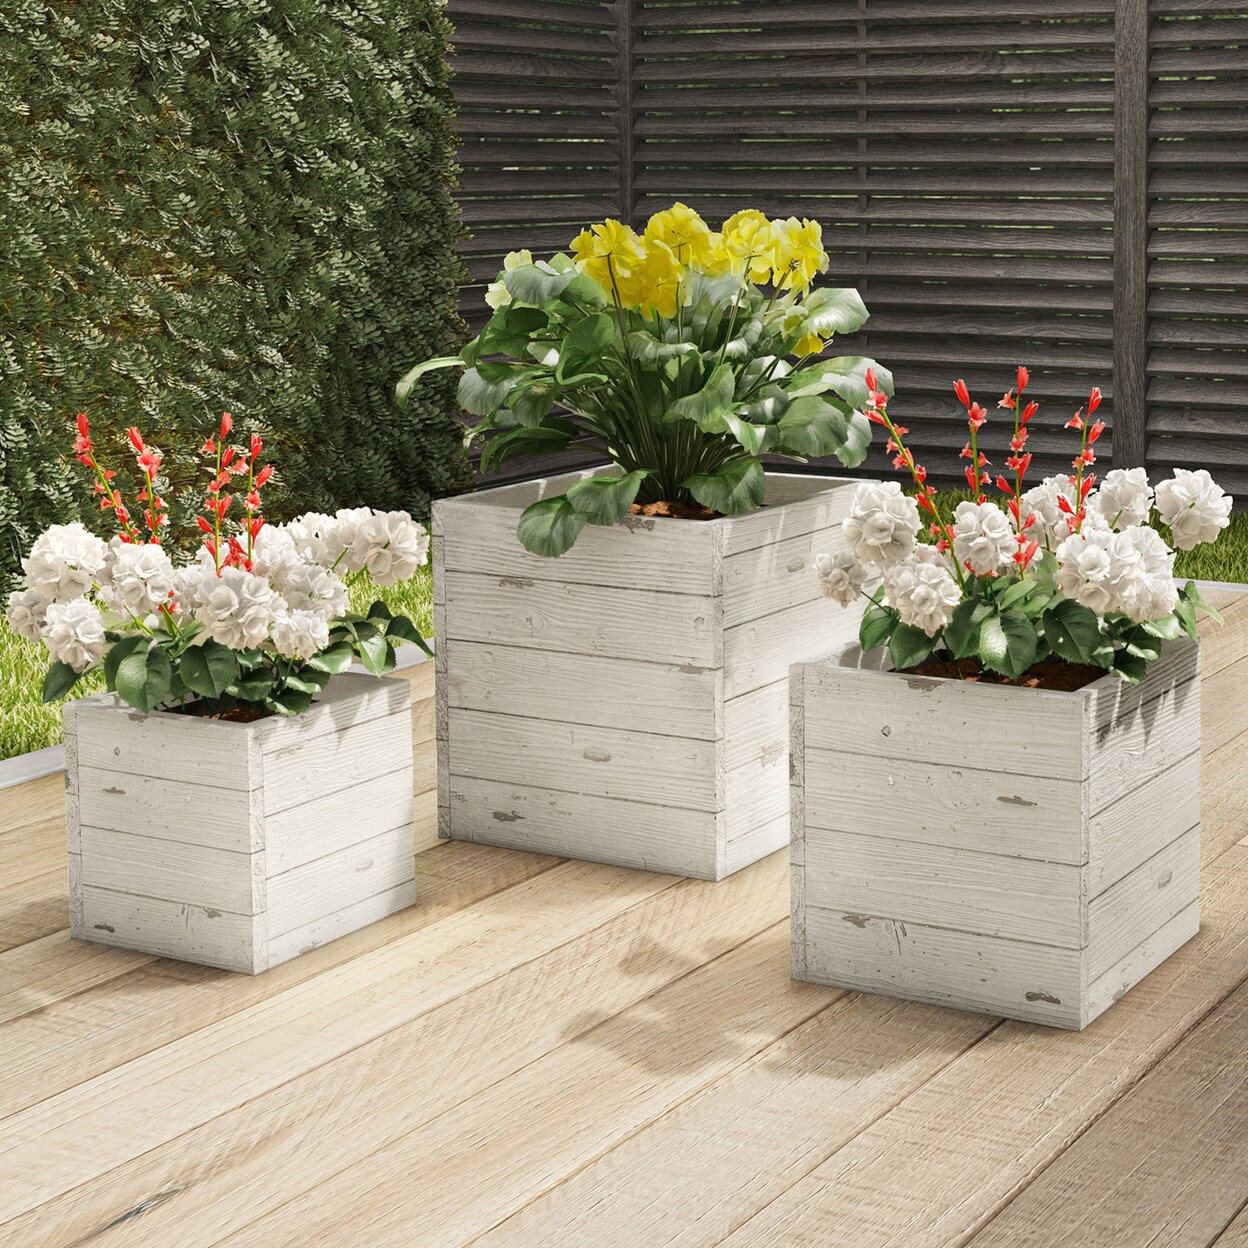 Pure Garden Square Fiber Clay Planter Set 3-Piece Varying Height Rustic Wood Look Pots